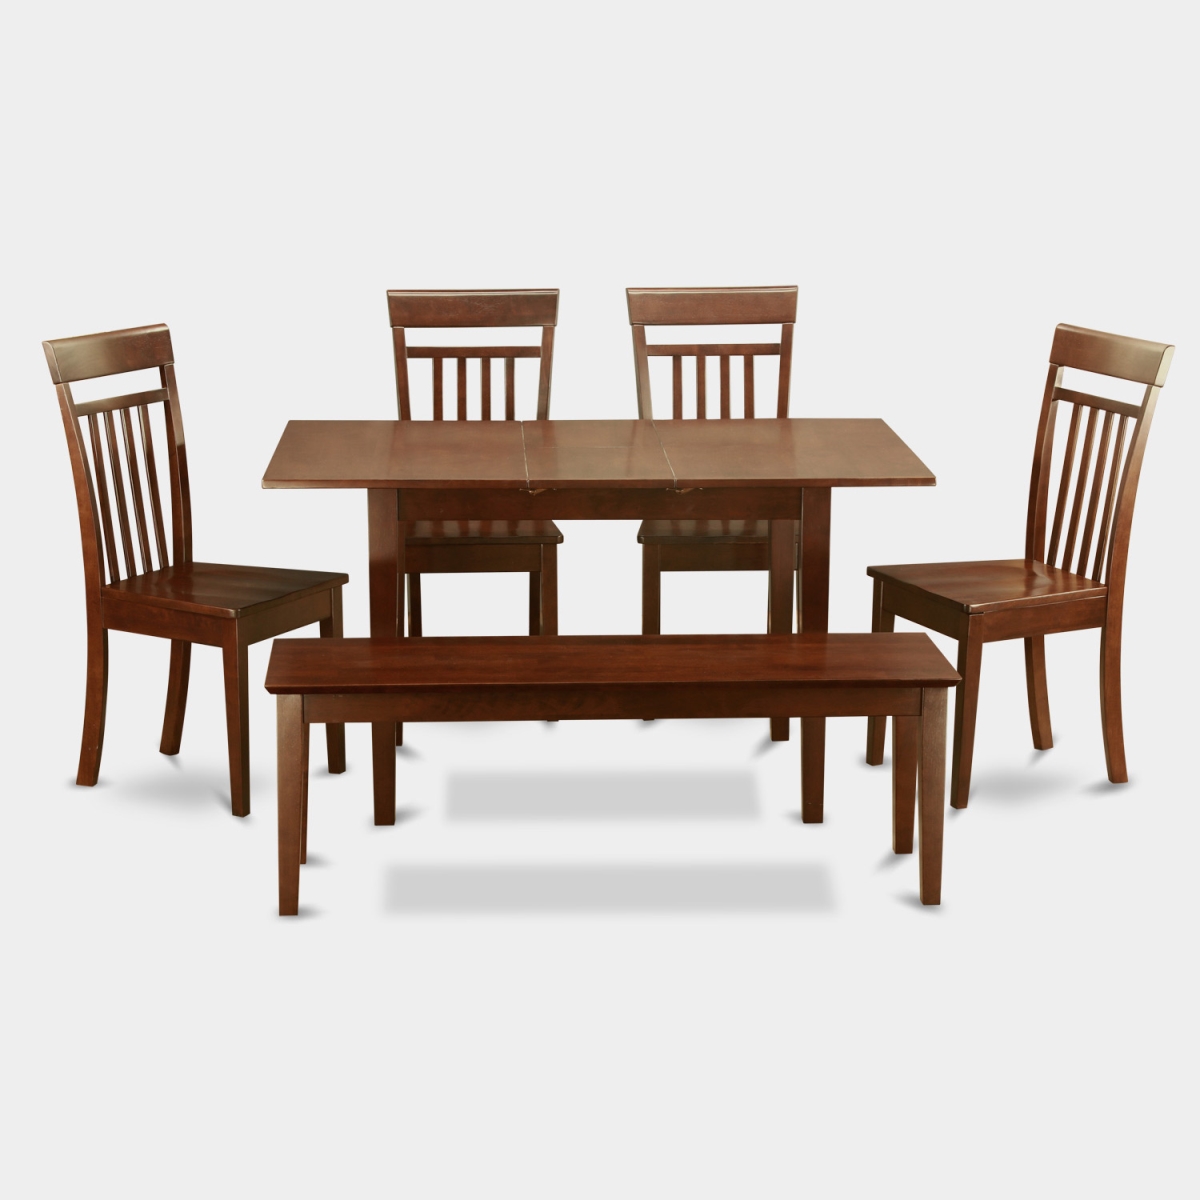 Picture of East West Furniture NOCA6C-MAH-W Table & Chairs Set - Kitchen Table & Four Chairs Plus One Bench - 6 Piece